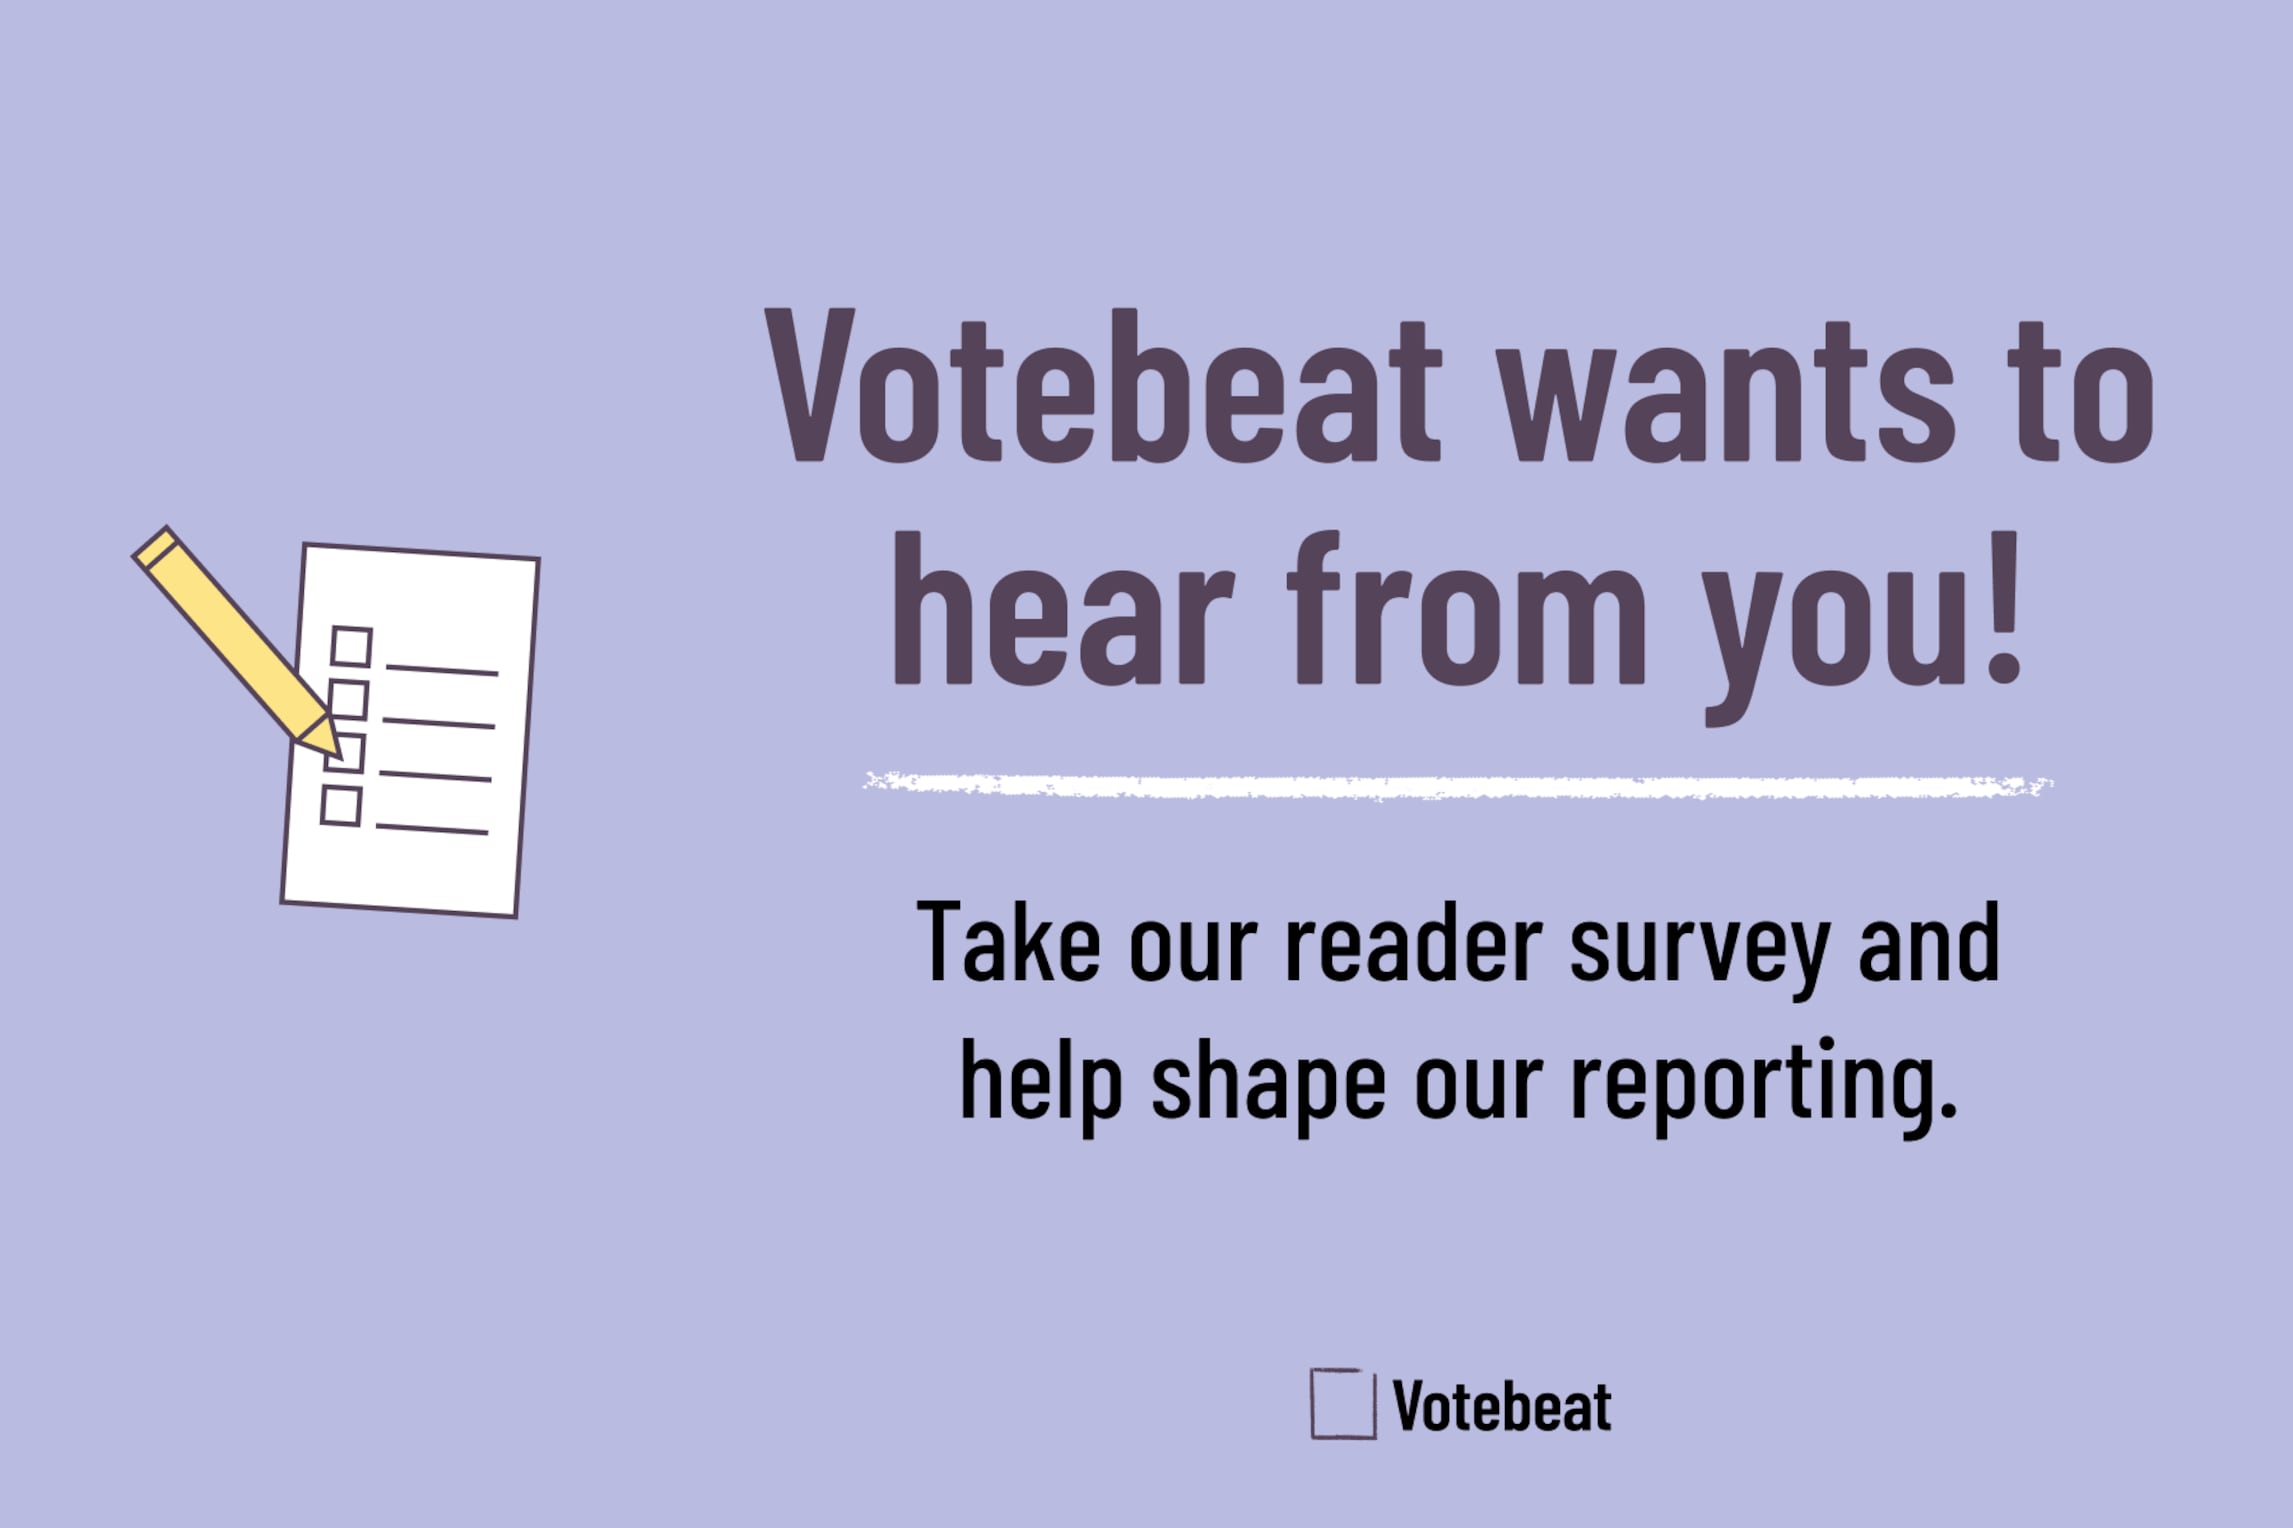 Image has text that reads: Votebeat wants to hear from you! Take our reader survey and help shape our reporting. Text is on a light purple background. To the left of the text is an illustration of a ballot and pencil. To the right of the text is an i